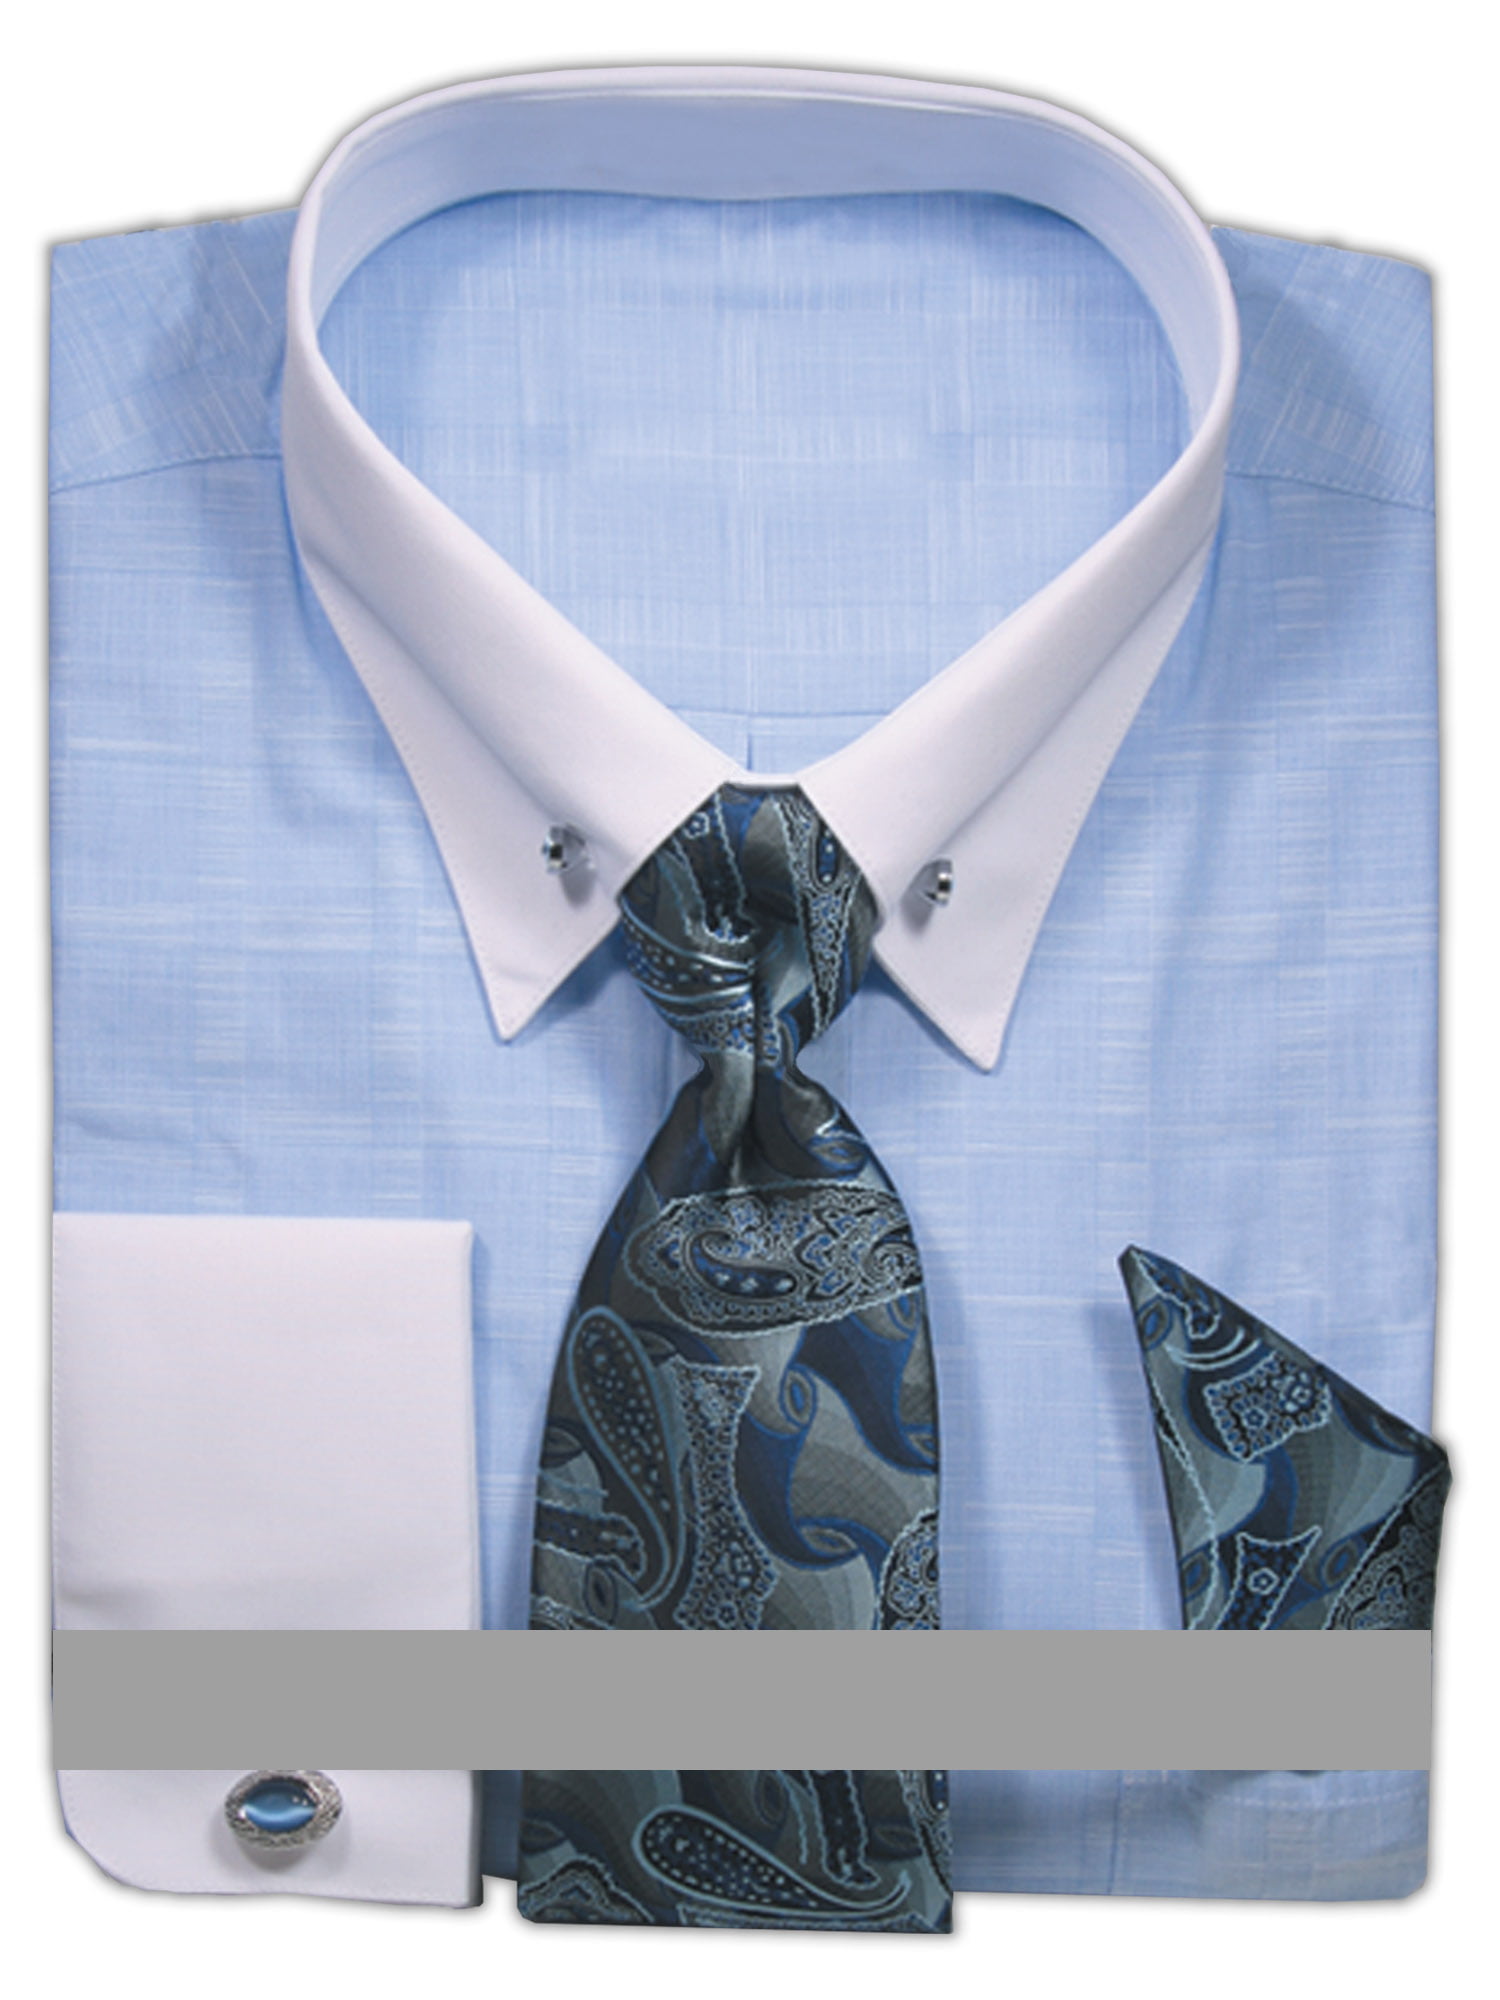 Mens French Cuff Jacquard Dress Shirt With Collar Bar Neck Tie Hanky